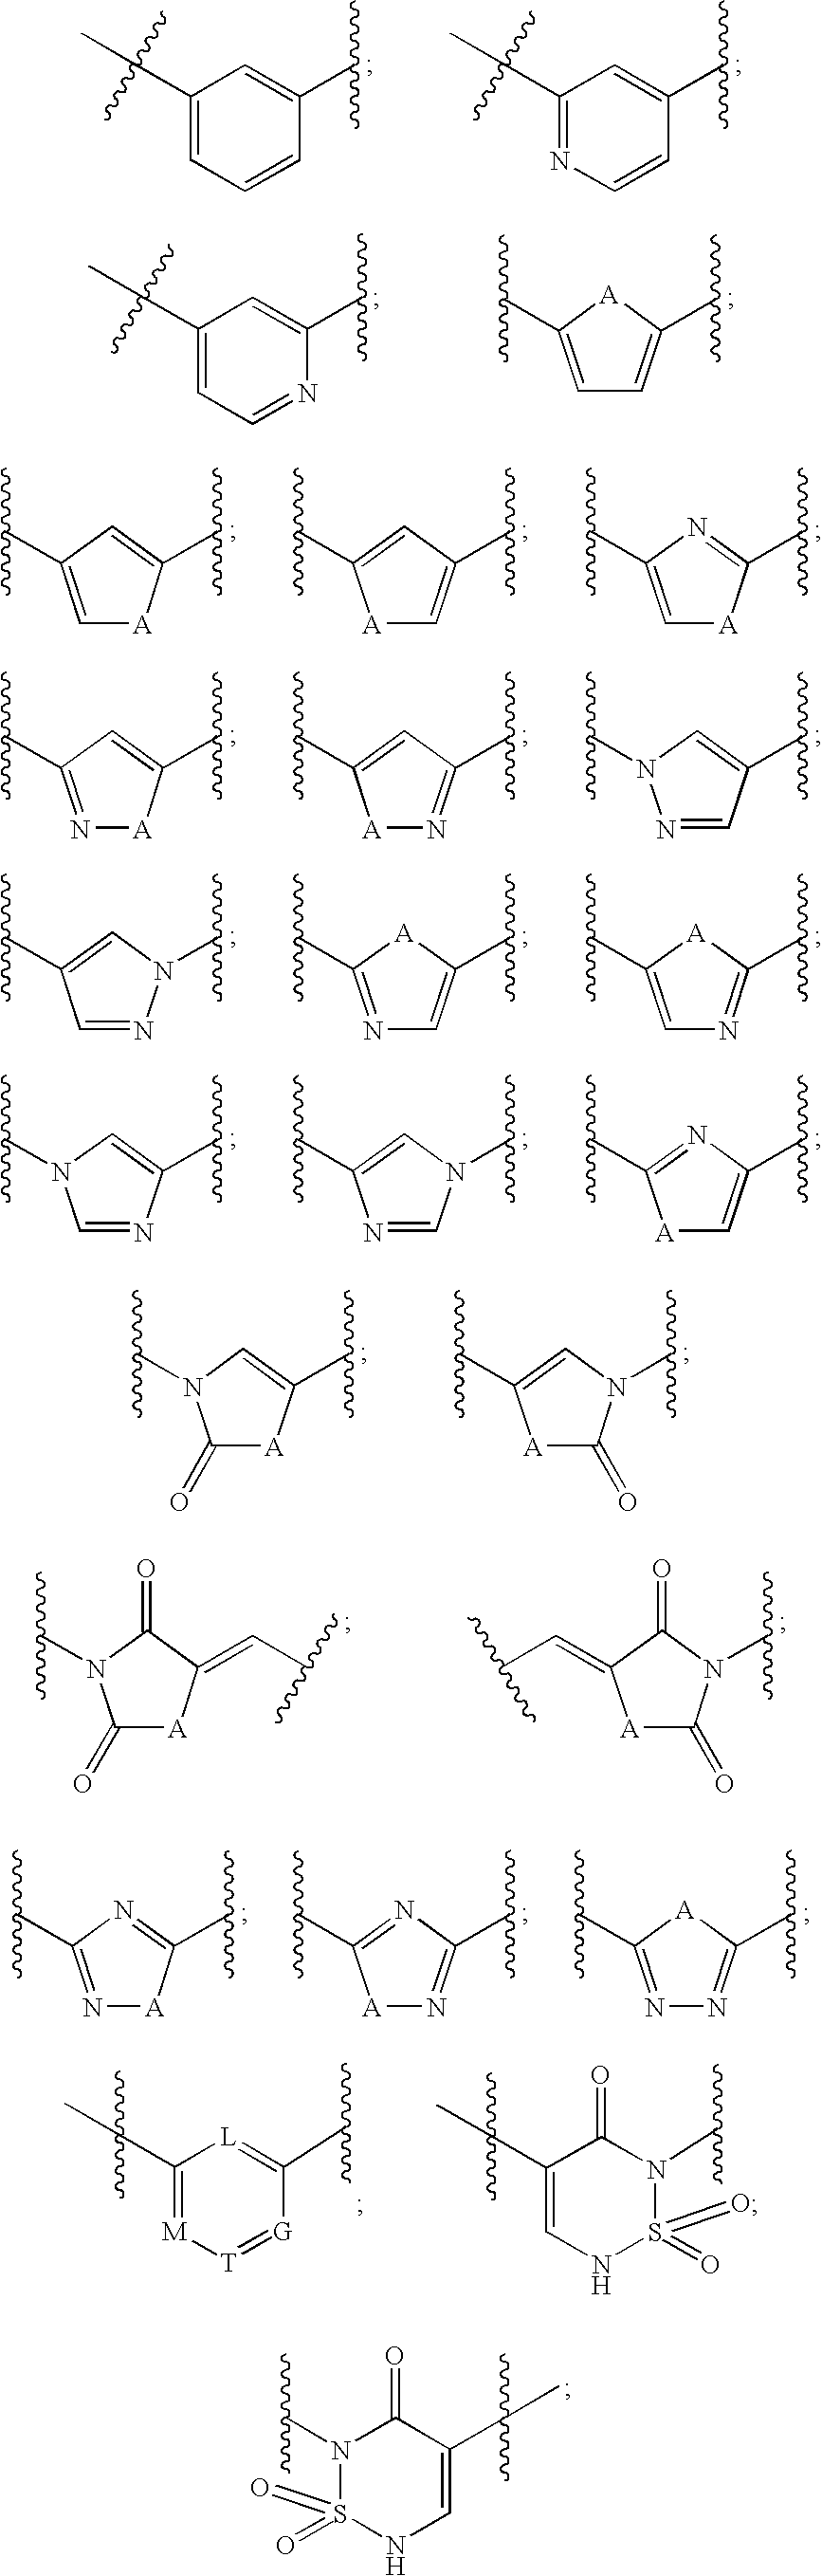 Metalloprotease inhibitors containing a heterocyclic moiety